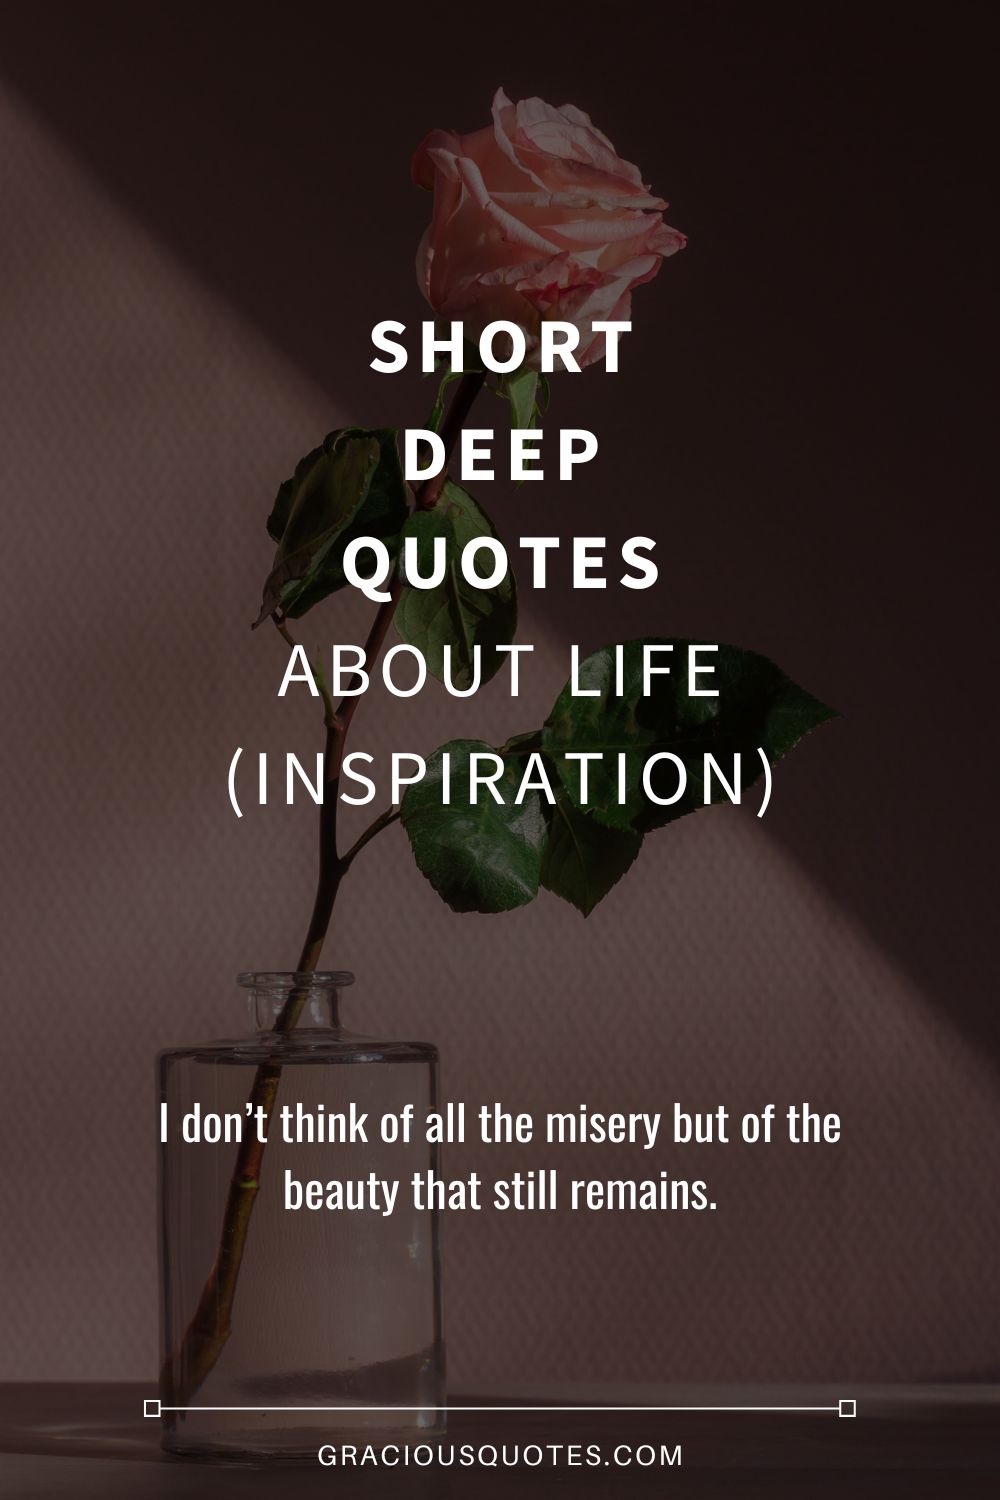 Pin on Great Quotes to live by